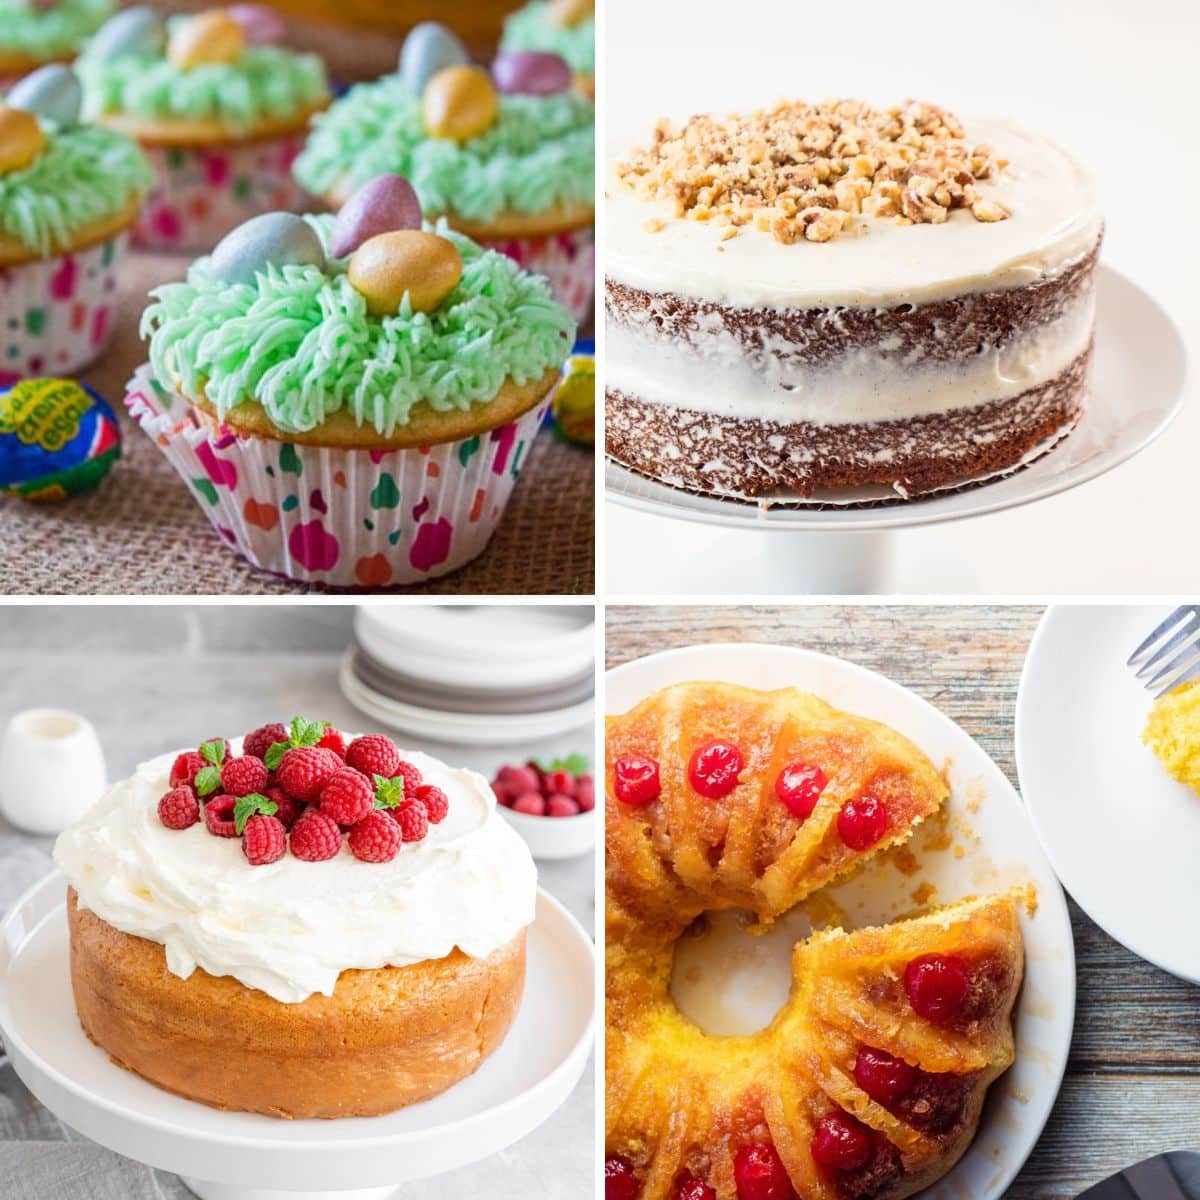 Best Easter Cakes: 29+ Delicious Cake Recipes For Easter Sunday